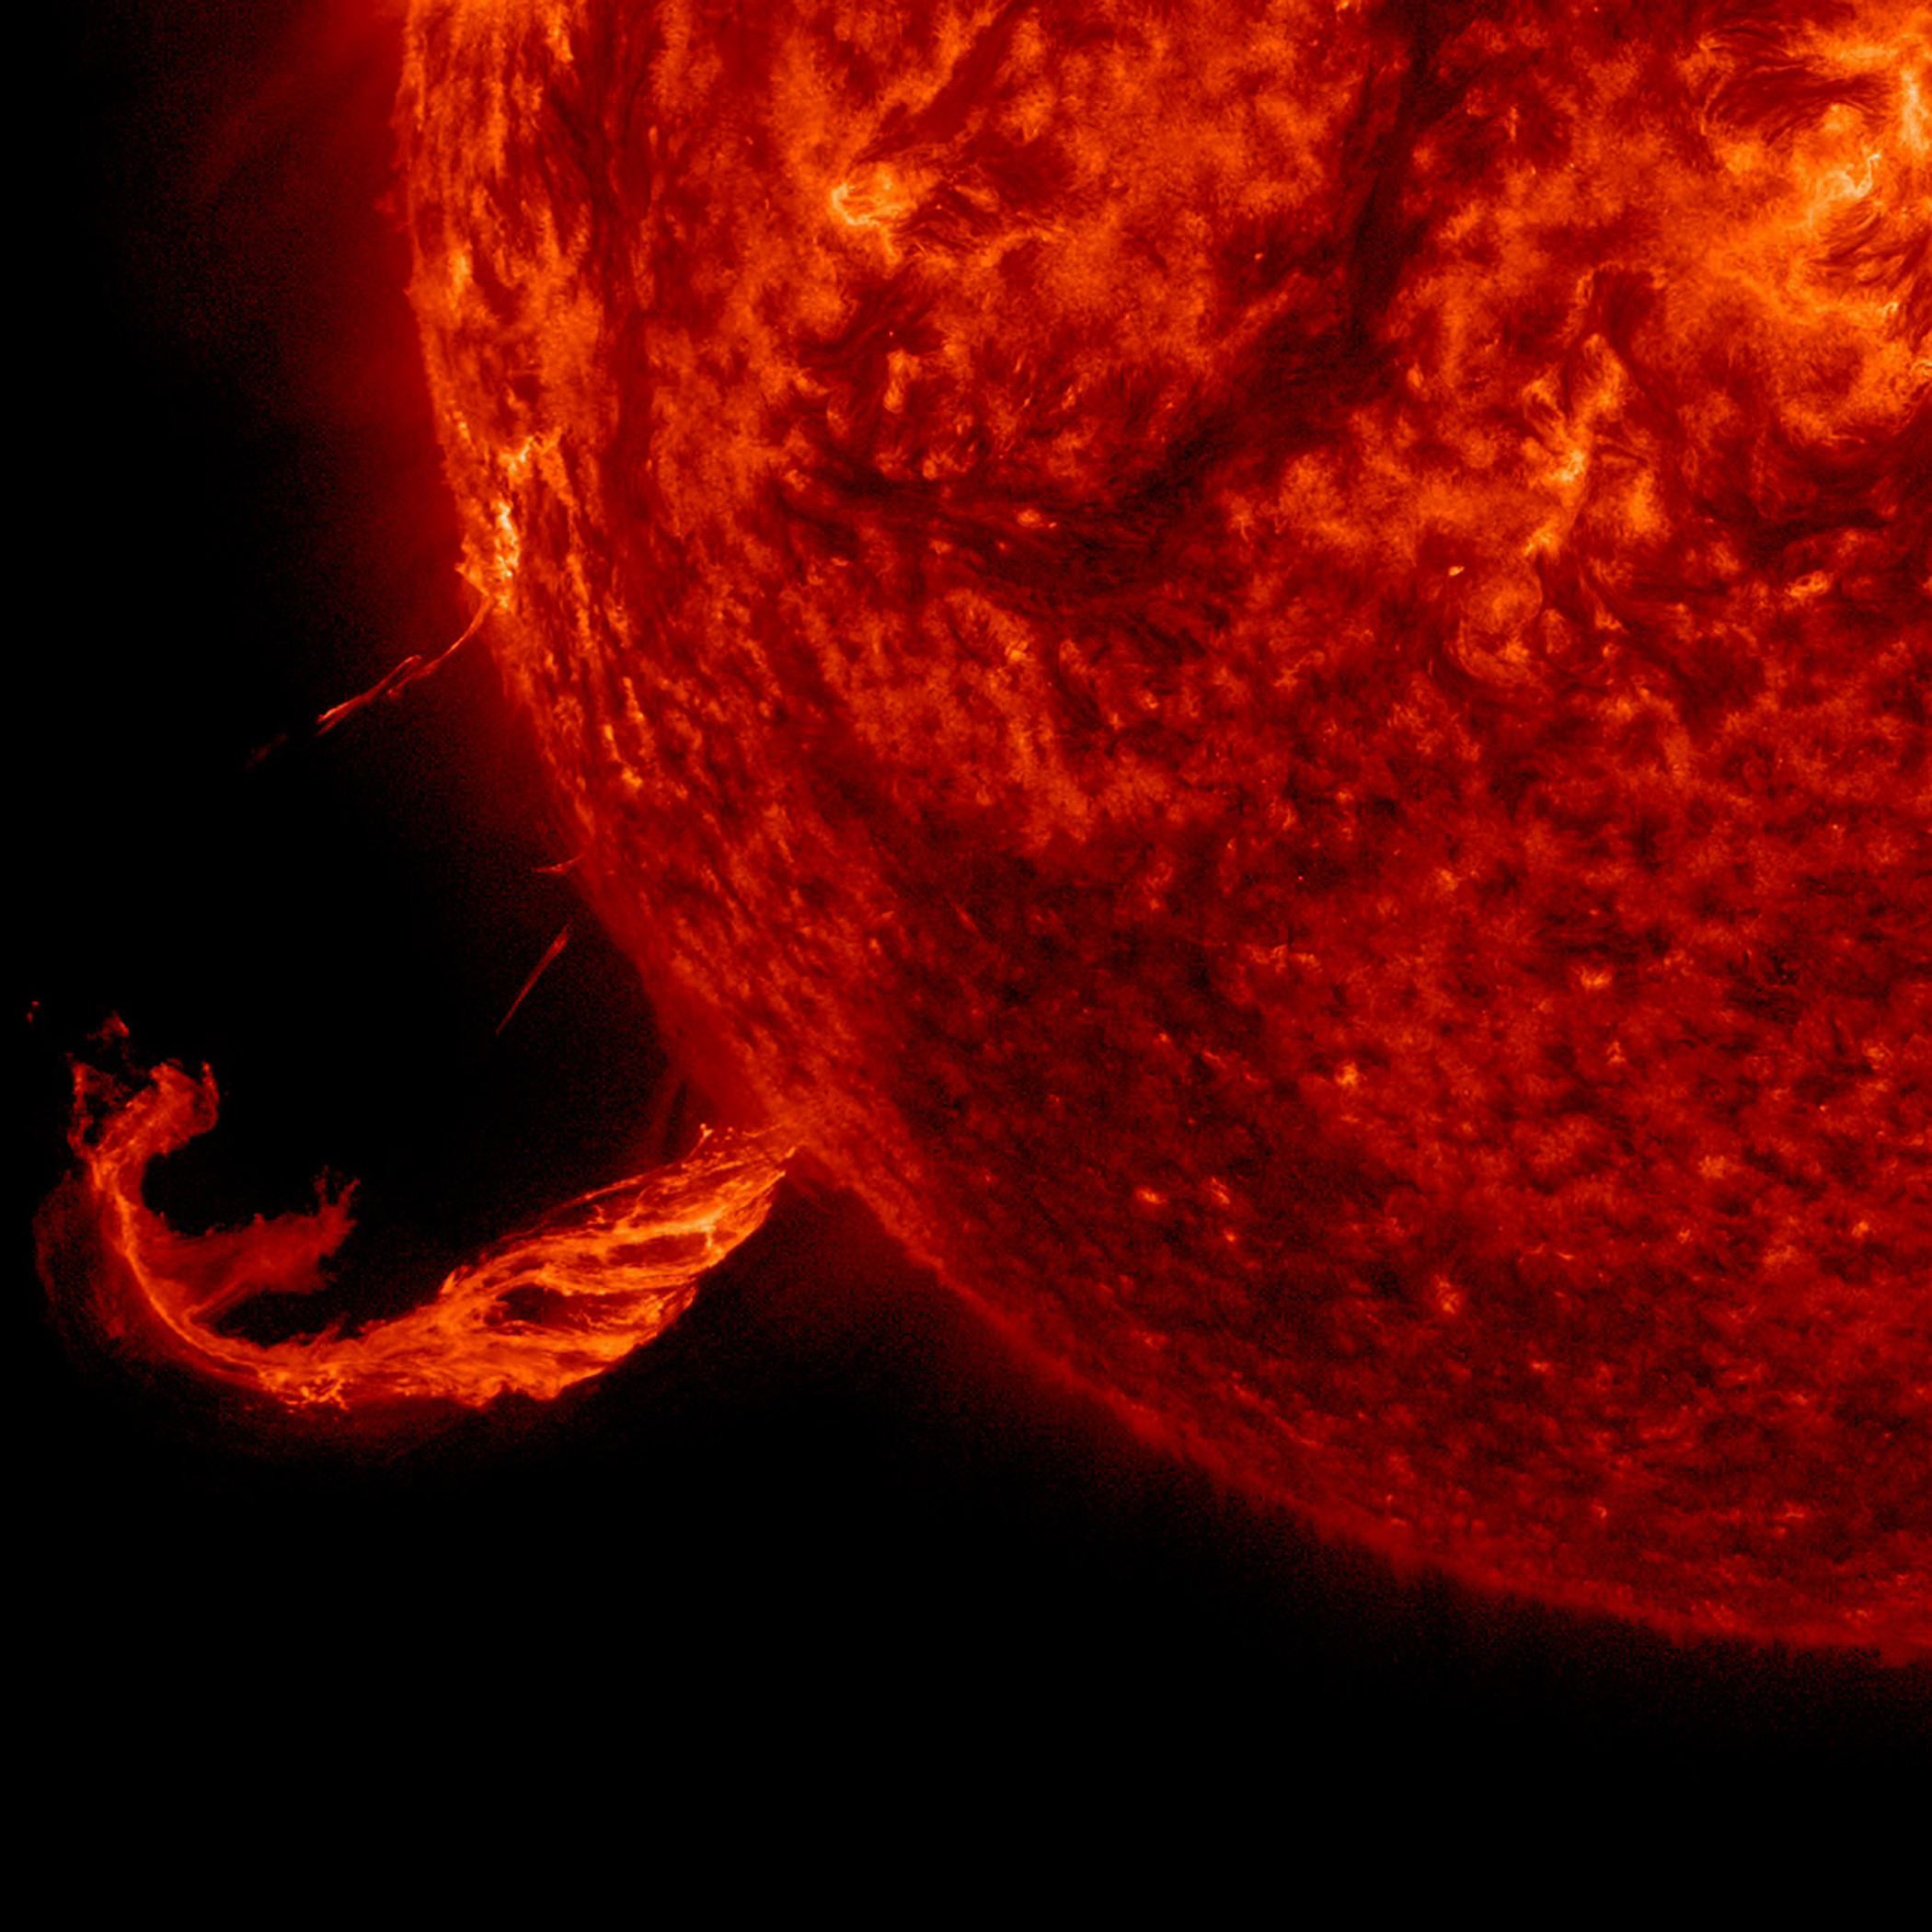 Brief Outburst The Sun blew out a coronal mass ejection along with part of a solar filament over a three-hour period (Feb. 24, 2015). While some of the strands fell back into the Sun, a substantial part raced into space in a bright cloud of particles (as observed by the SOHO spacecraft). The activity was captured in a wavelength of extreme ultraviolet light. Because this occurred way over near the edge of the Sun, it was unlikely to have any effect on Earth.https://www.flickr.com/photos/gsfc/16760026566/